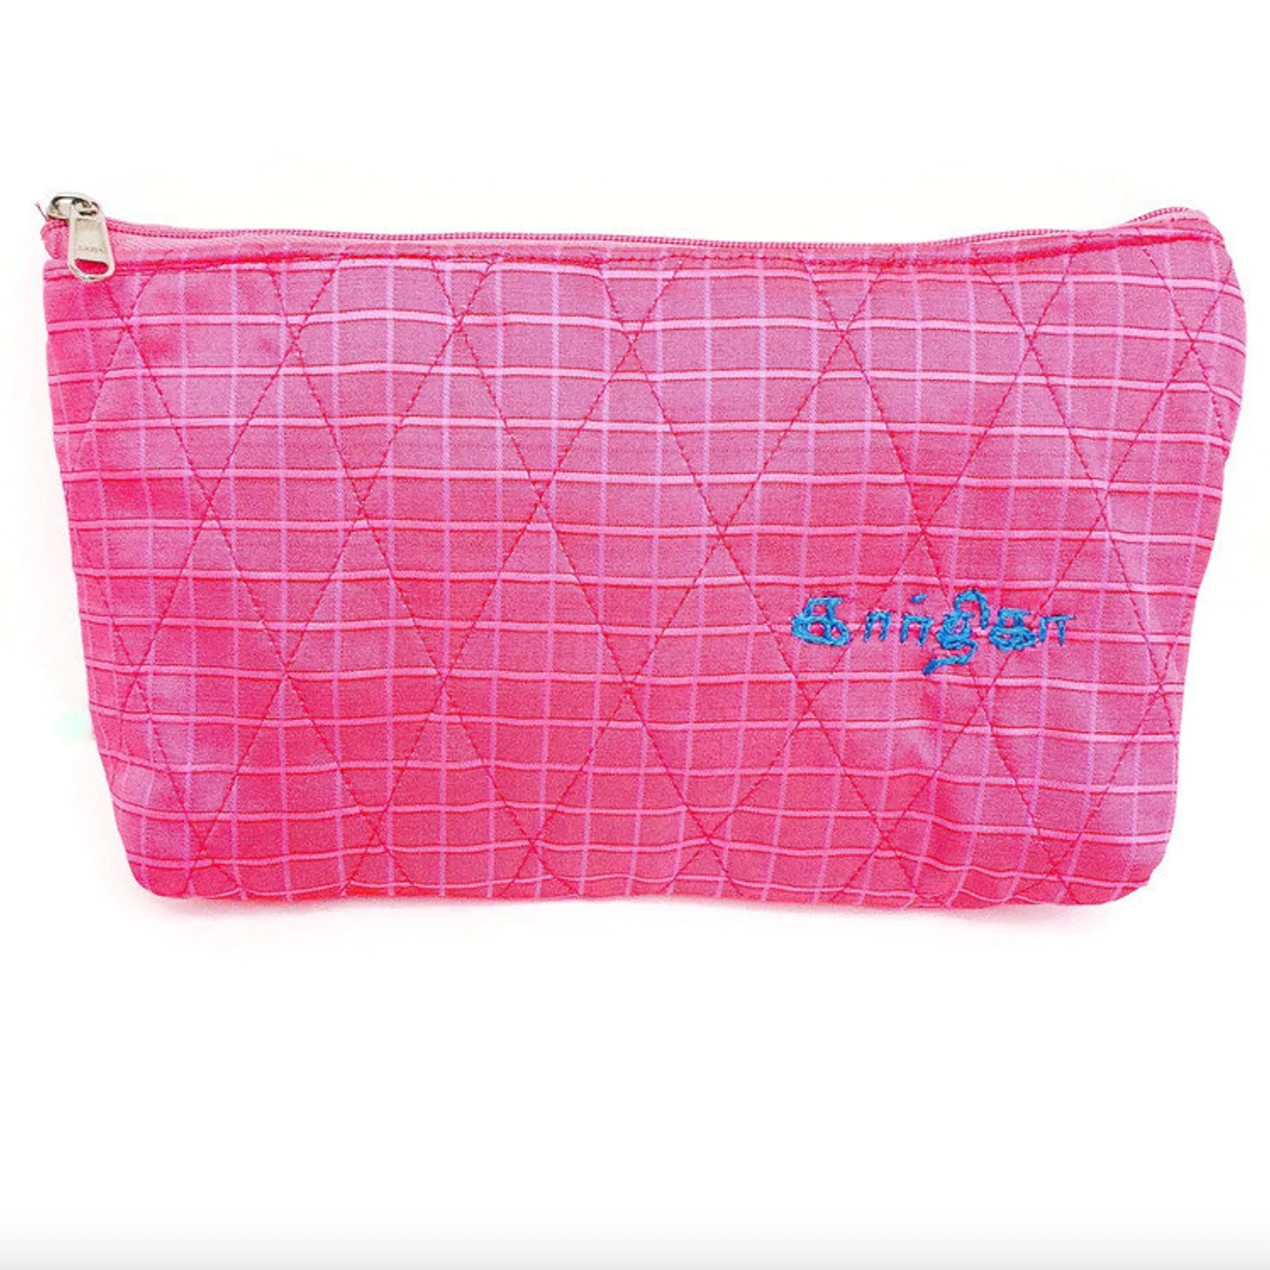 Flat Bottom Upcycled Sari Pouch - Hot pink